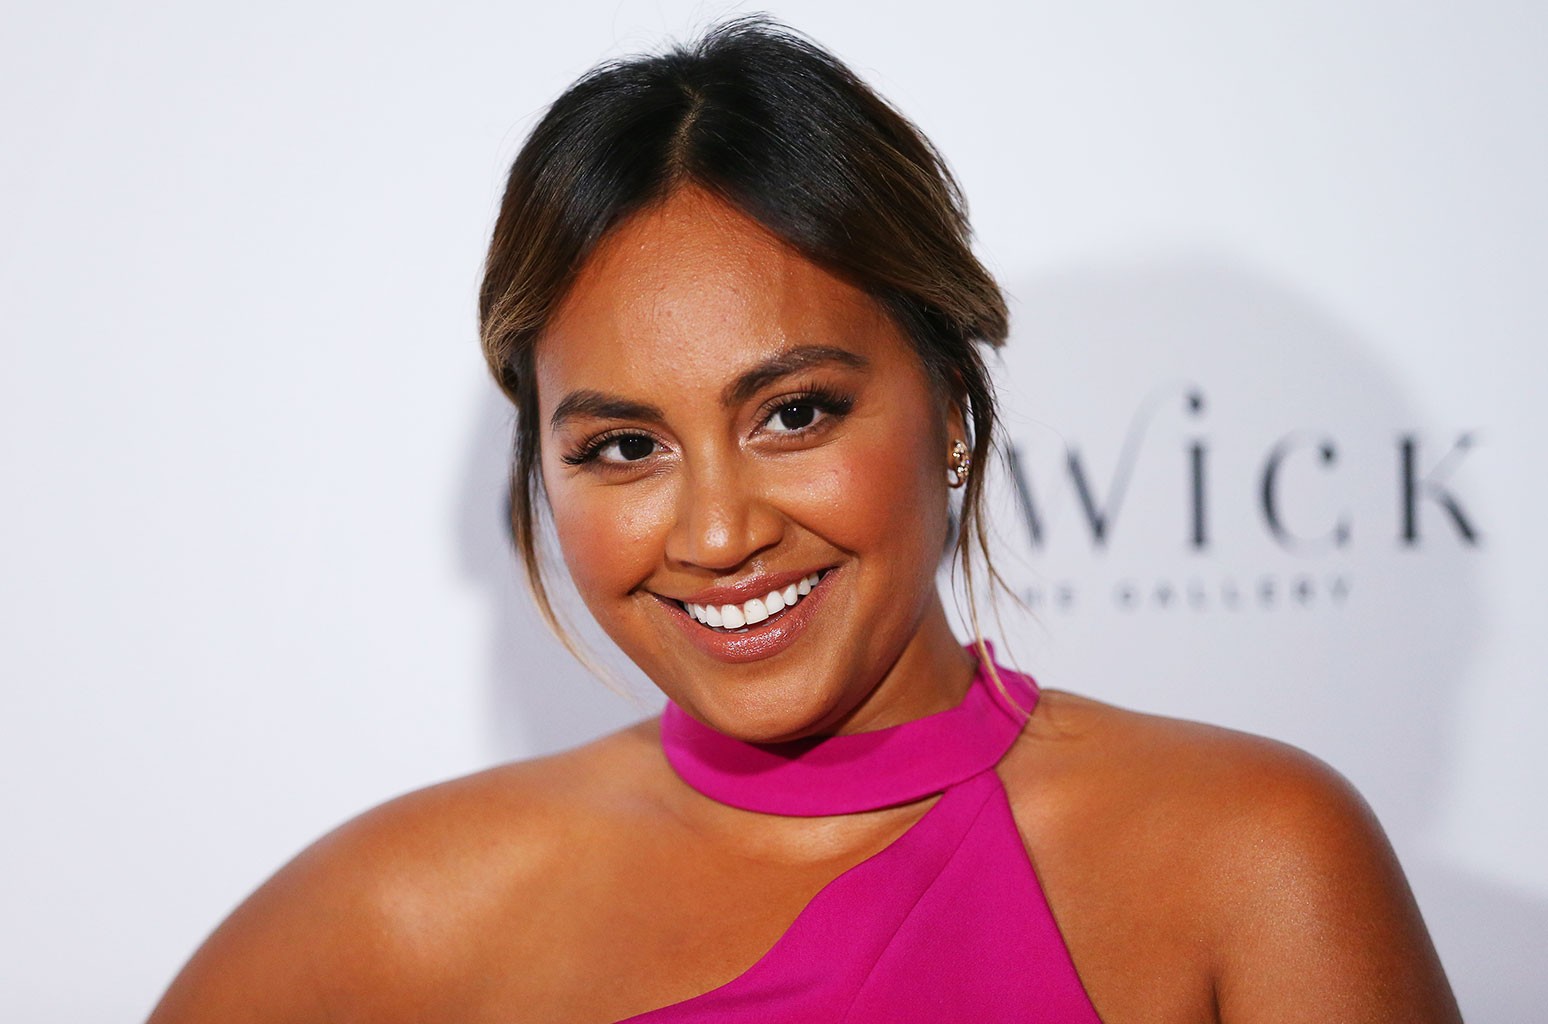 How rich is Jessica Mauboy?